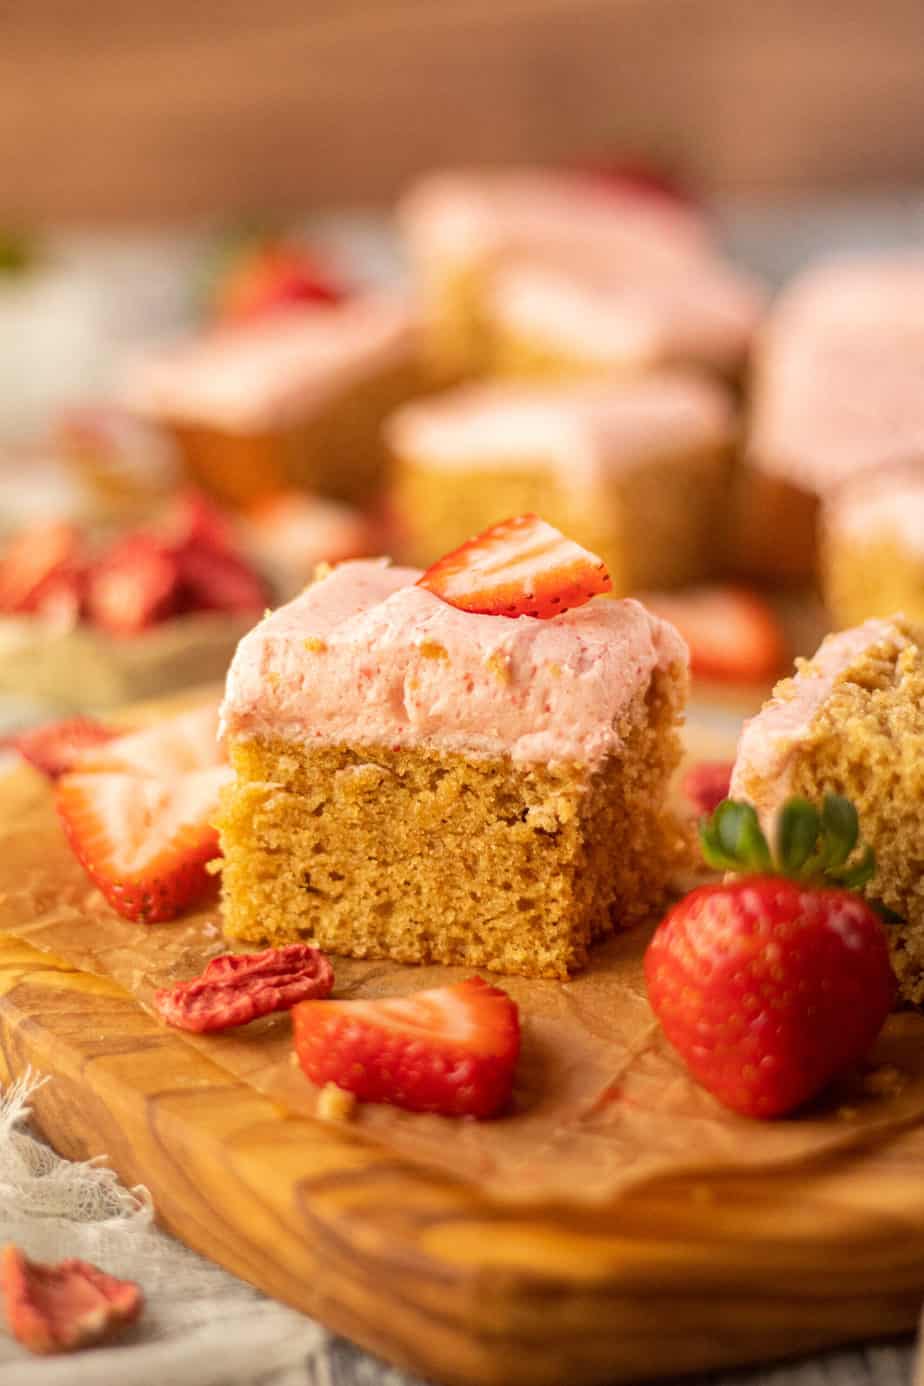 side angle shot of sliced peanut butter cake with strawberry frosting on a wooden cutting board. sliced strawberries scattered in perimeter of shot.